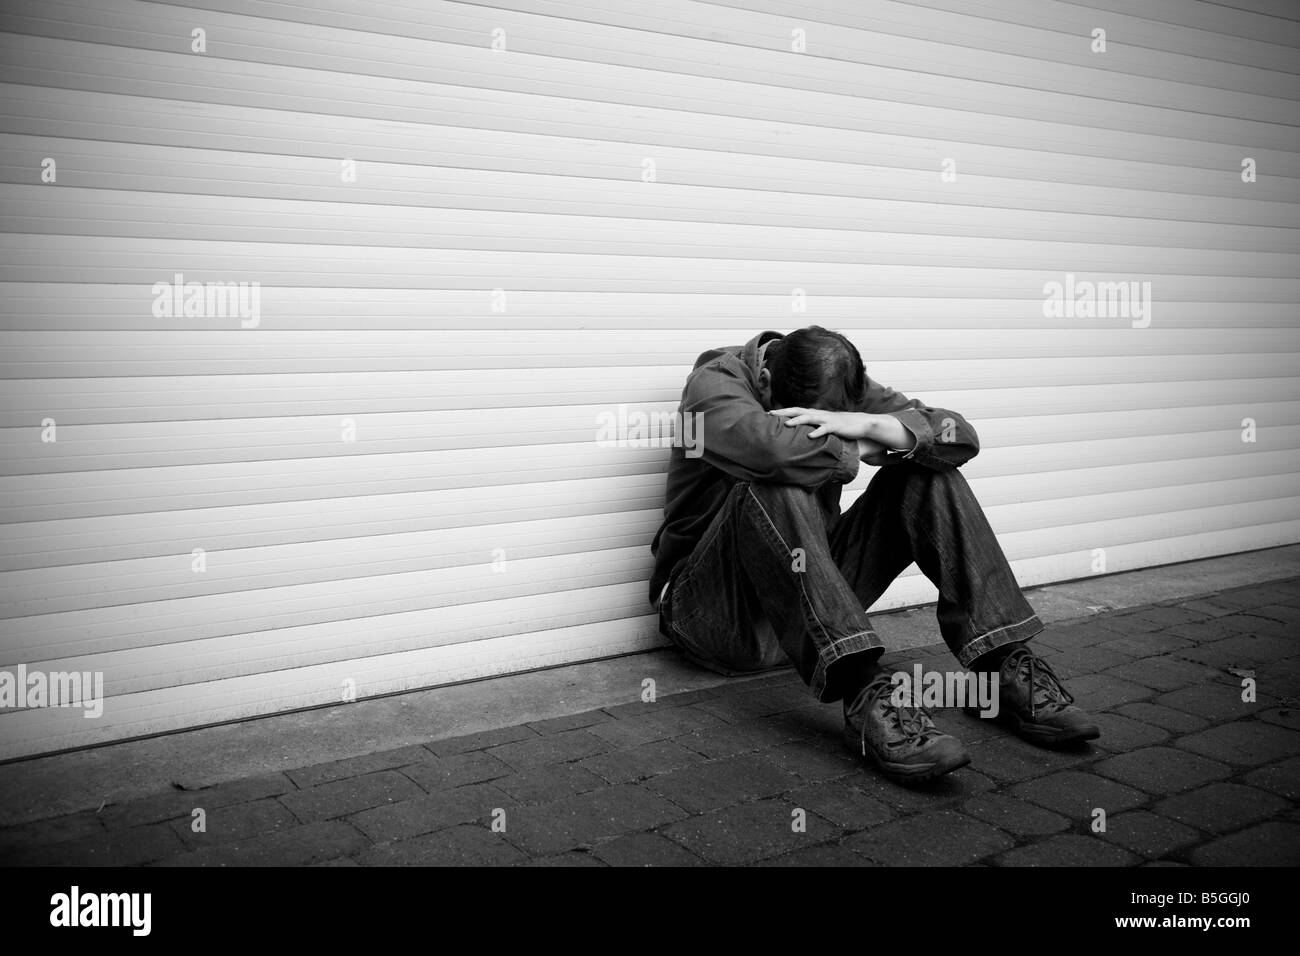 Lonely & dejected man Stock Photo